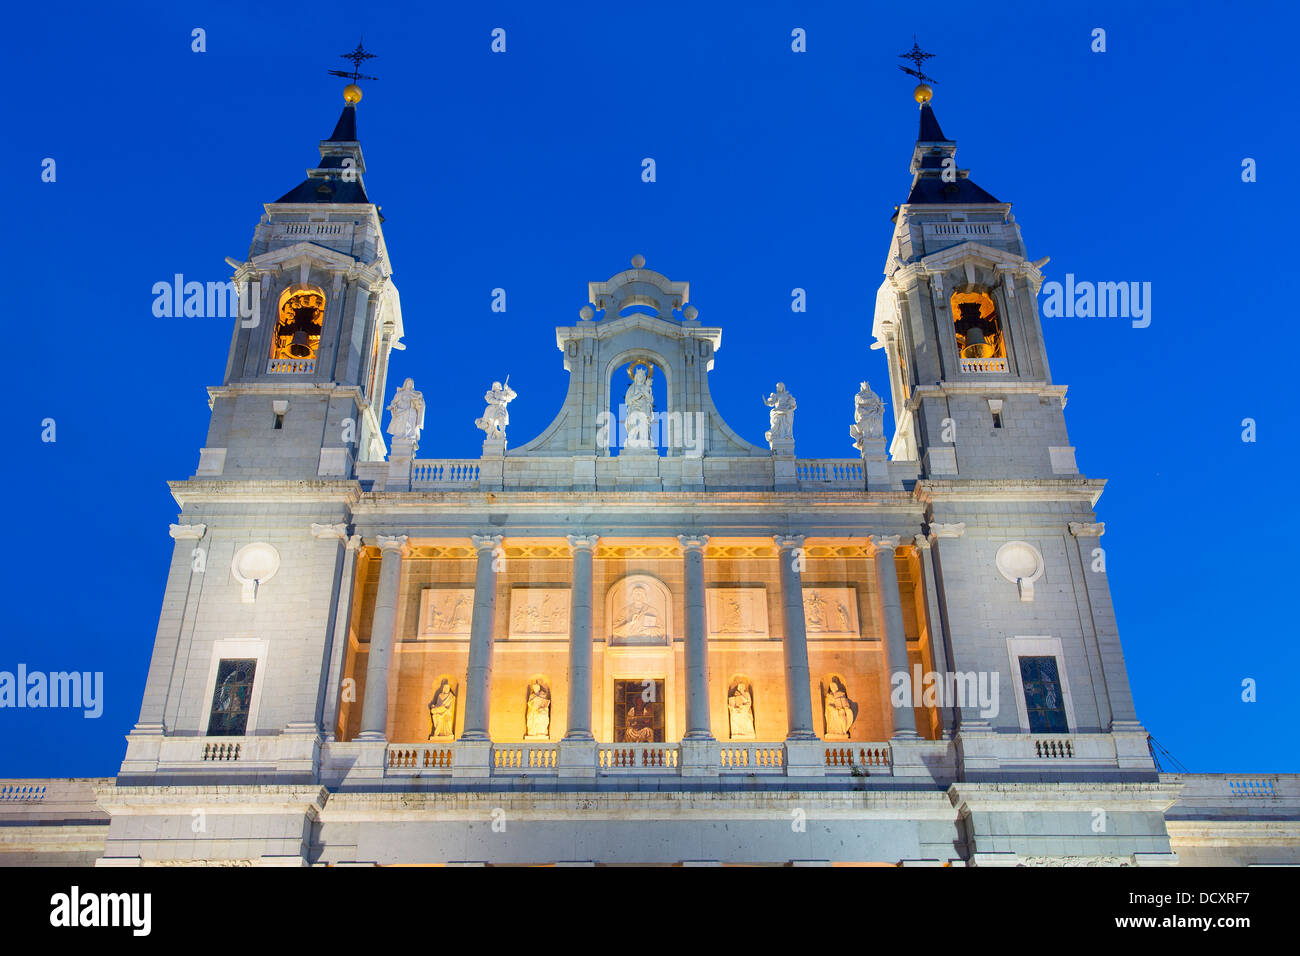 Madrid, Almudena Cathedral at Dusk Stock Photo